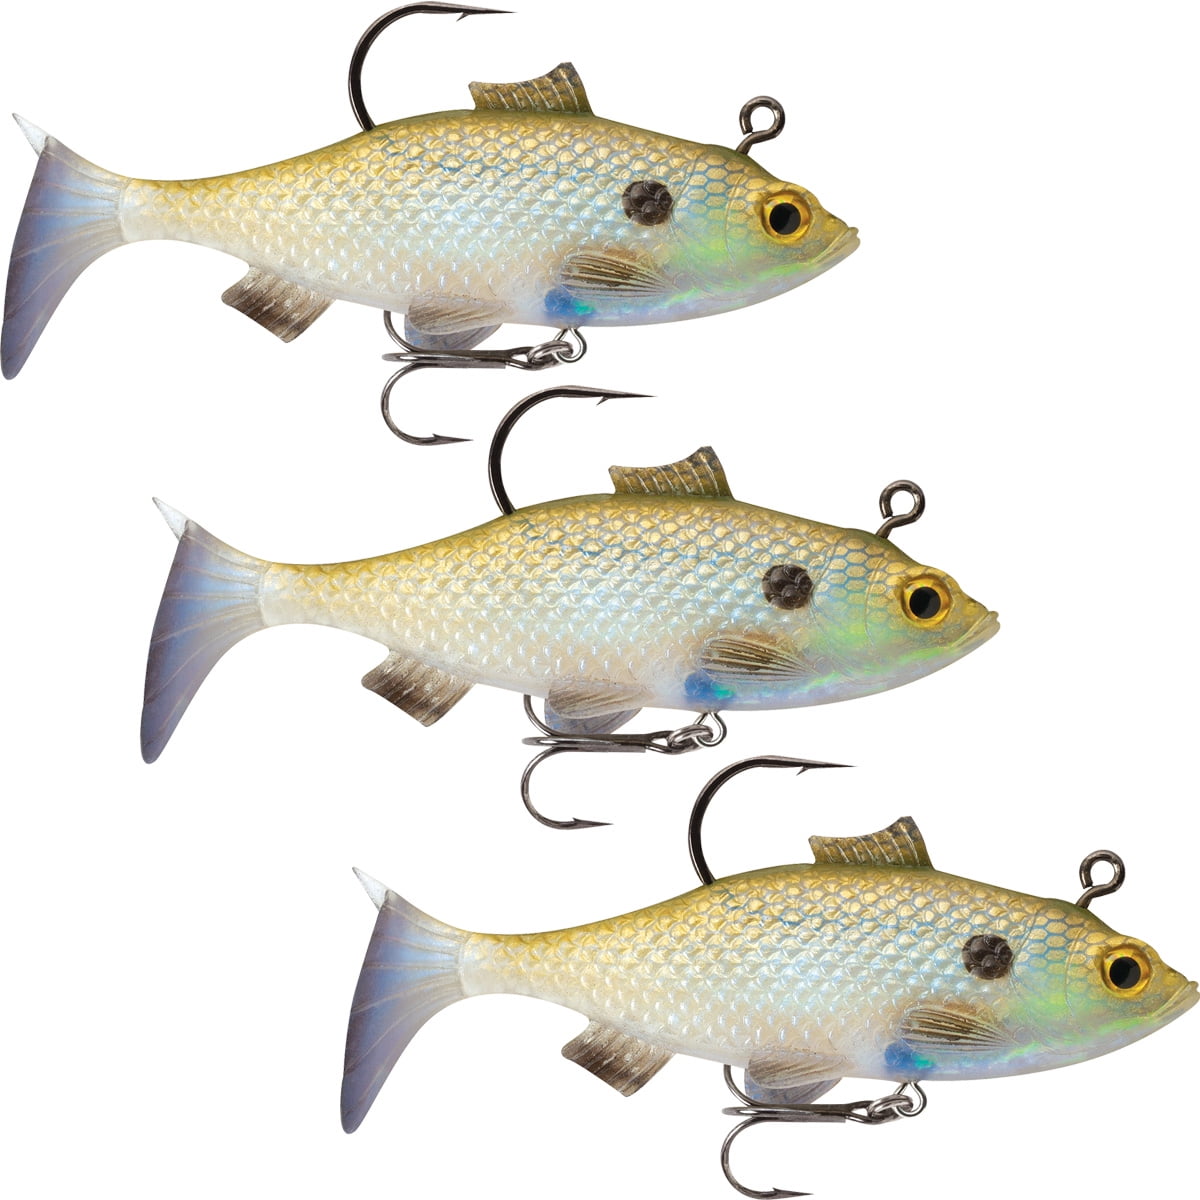 Storm WildEye Live Gizzard Shad 03 Fishing Lures (3-Pack) - Olive Back 